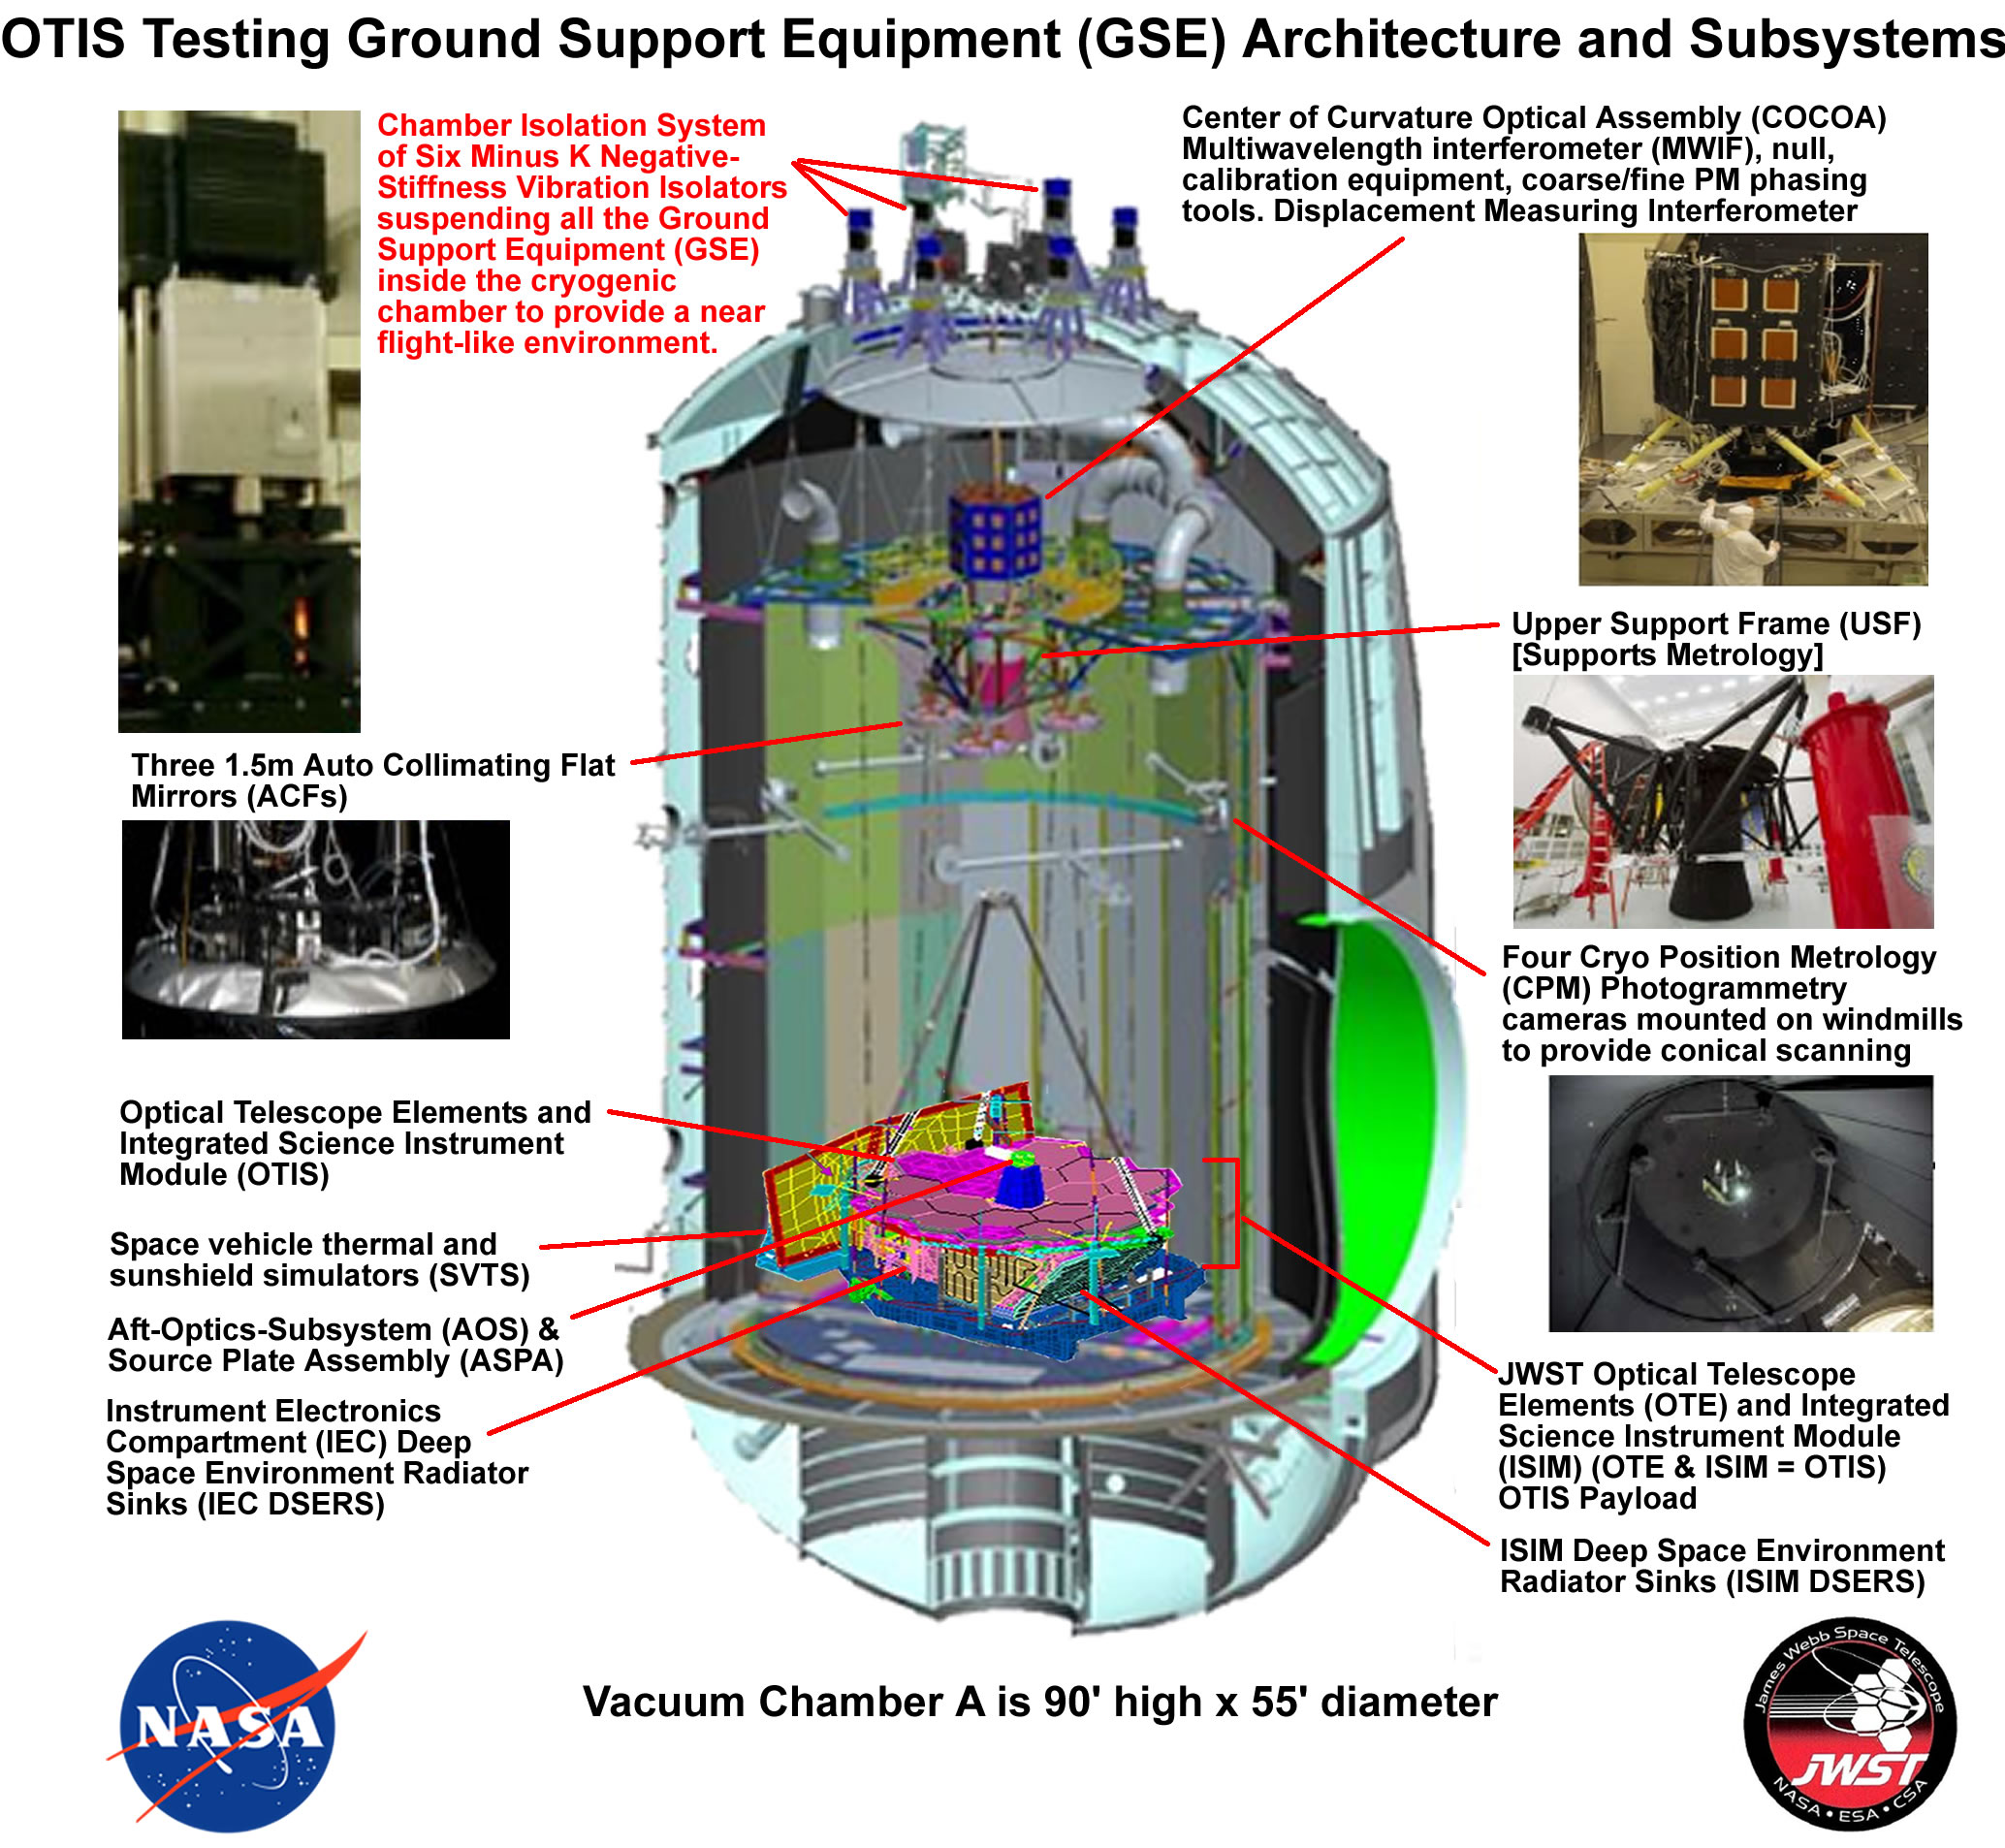 JWST OTIS Testing Ground Support Equipment (GSA) Architecture and Subsystems